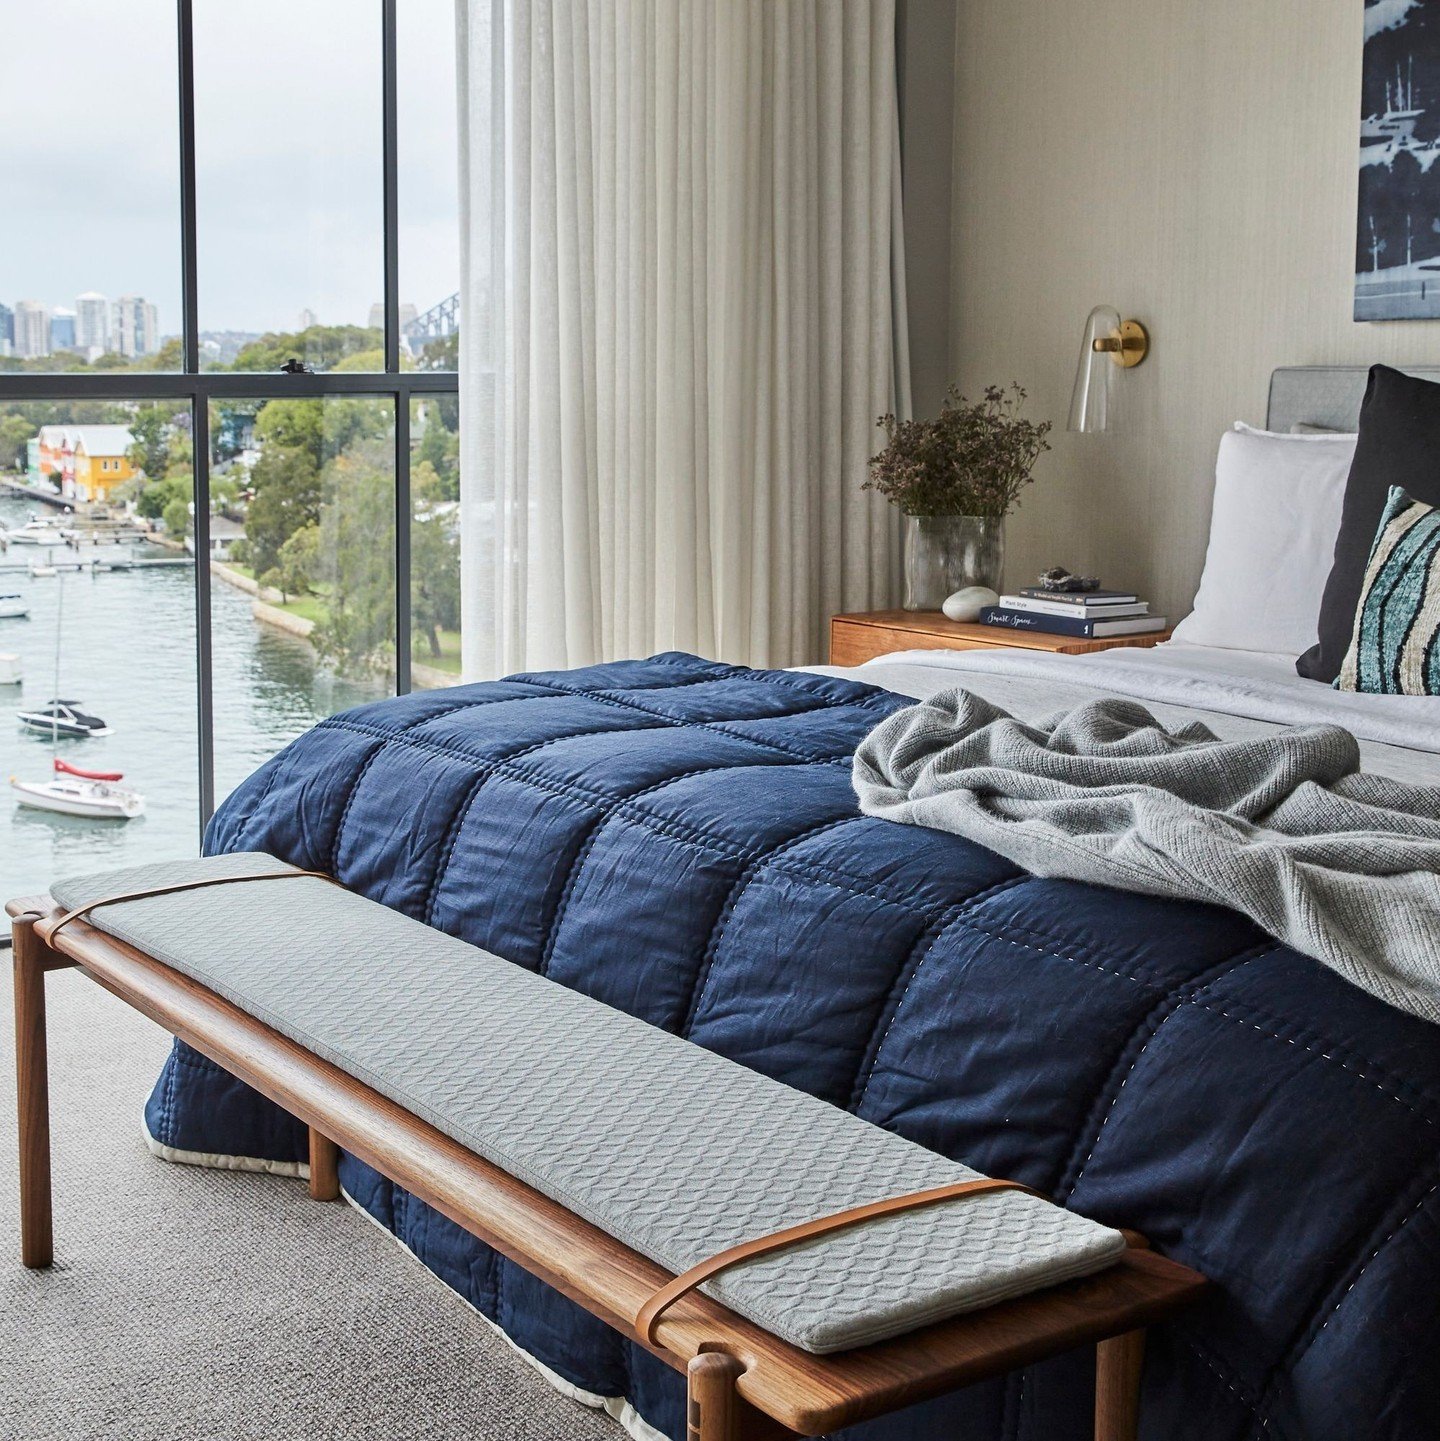 Who wouldn't like to wake up here? A dreamy main bedroom with a dreamy view. A hotel like space with its own sitting area, walk in wardrobe and luxurious ensuite. Our #harbourviewapartment project.⁠
⁠
Photography @ess.creative | Styling @samantha.sta